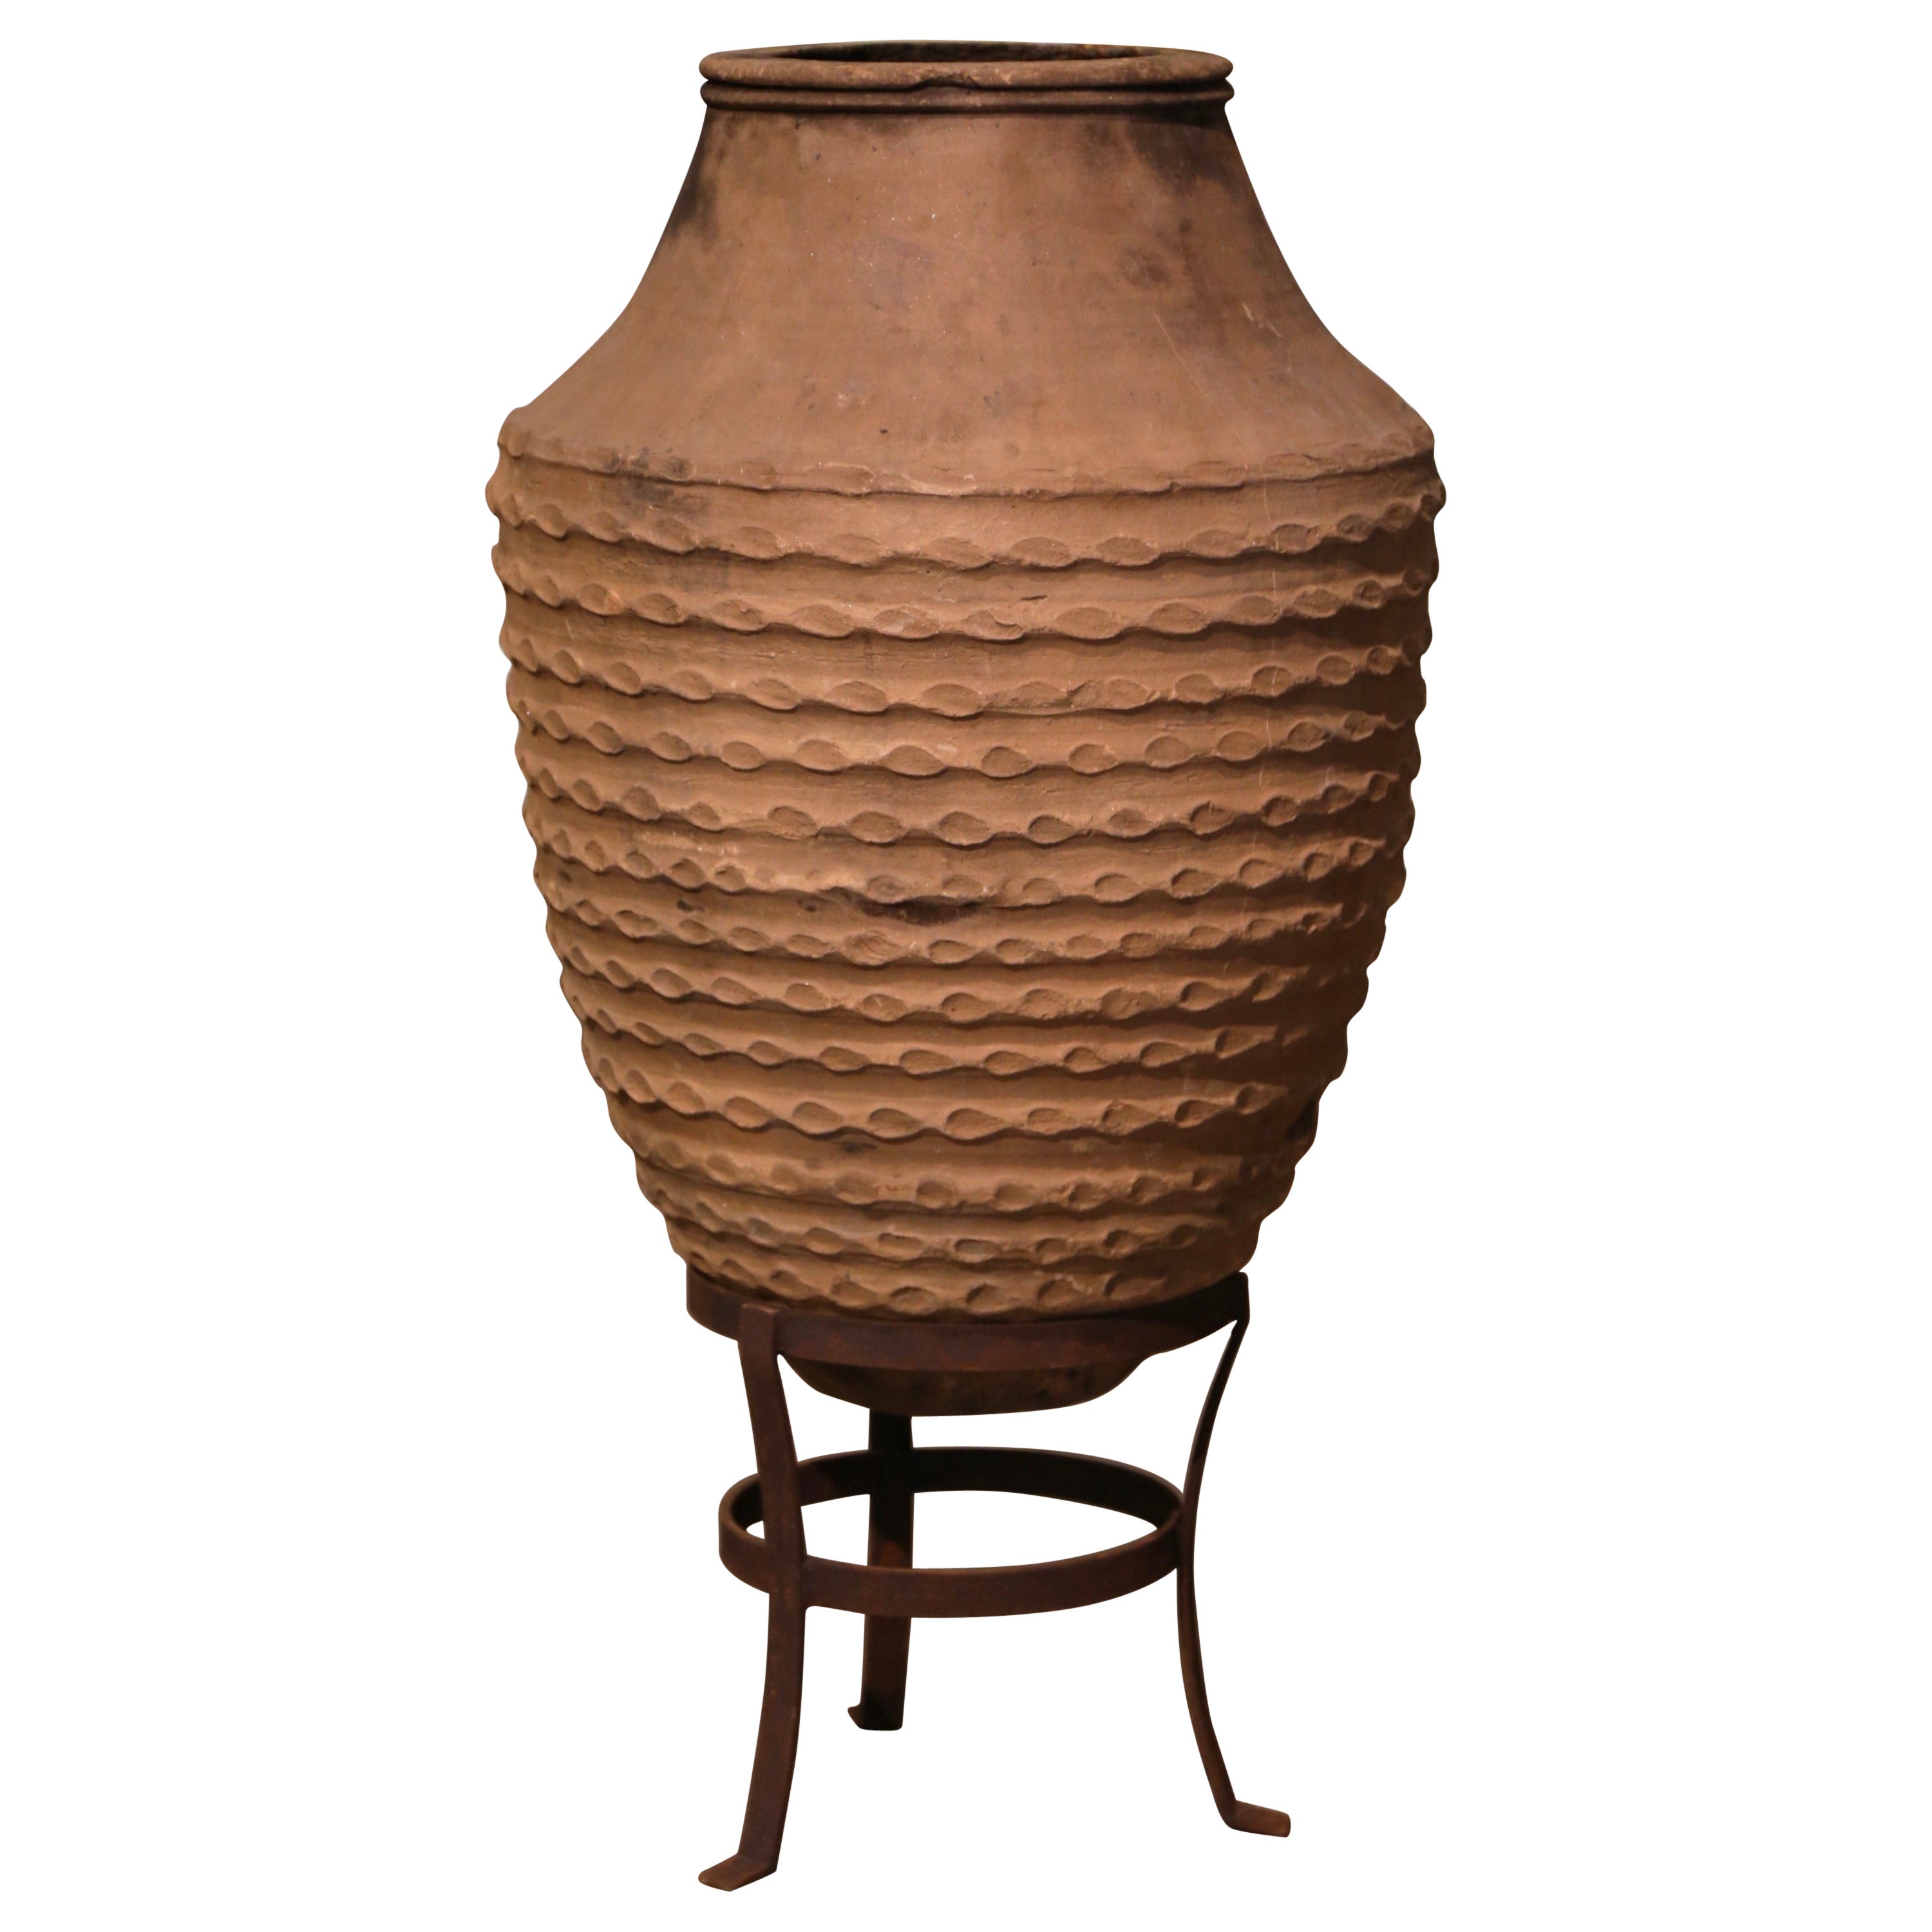 Early 20th Century Greek Fired Banded Terracotta Olive Jar with Iron Stand For Sale